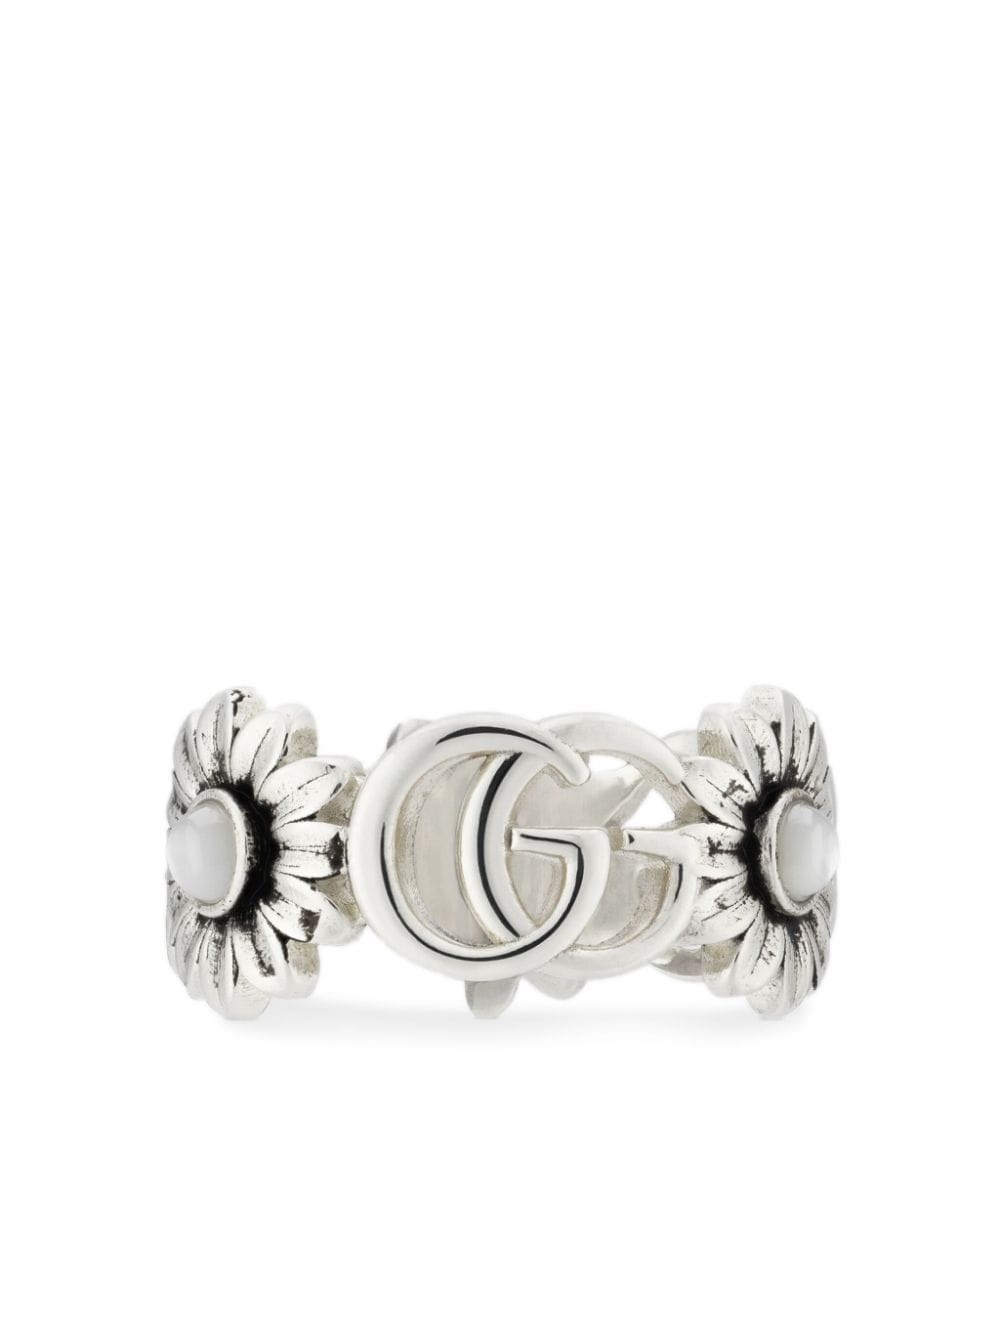 GG Marmont floral ring - 2